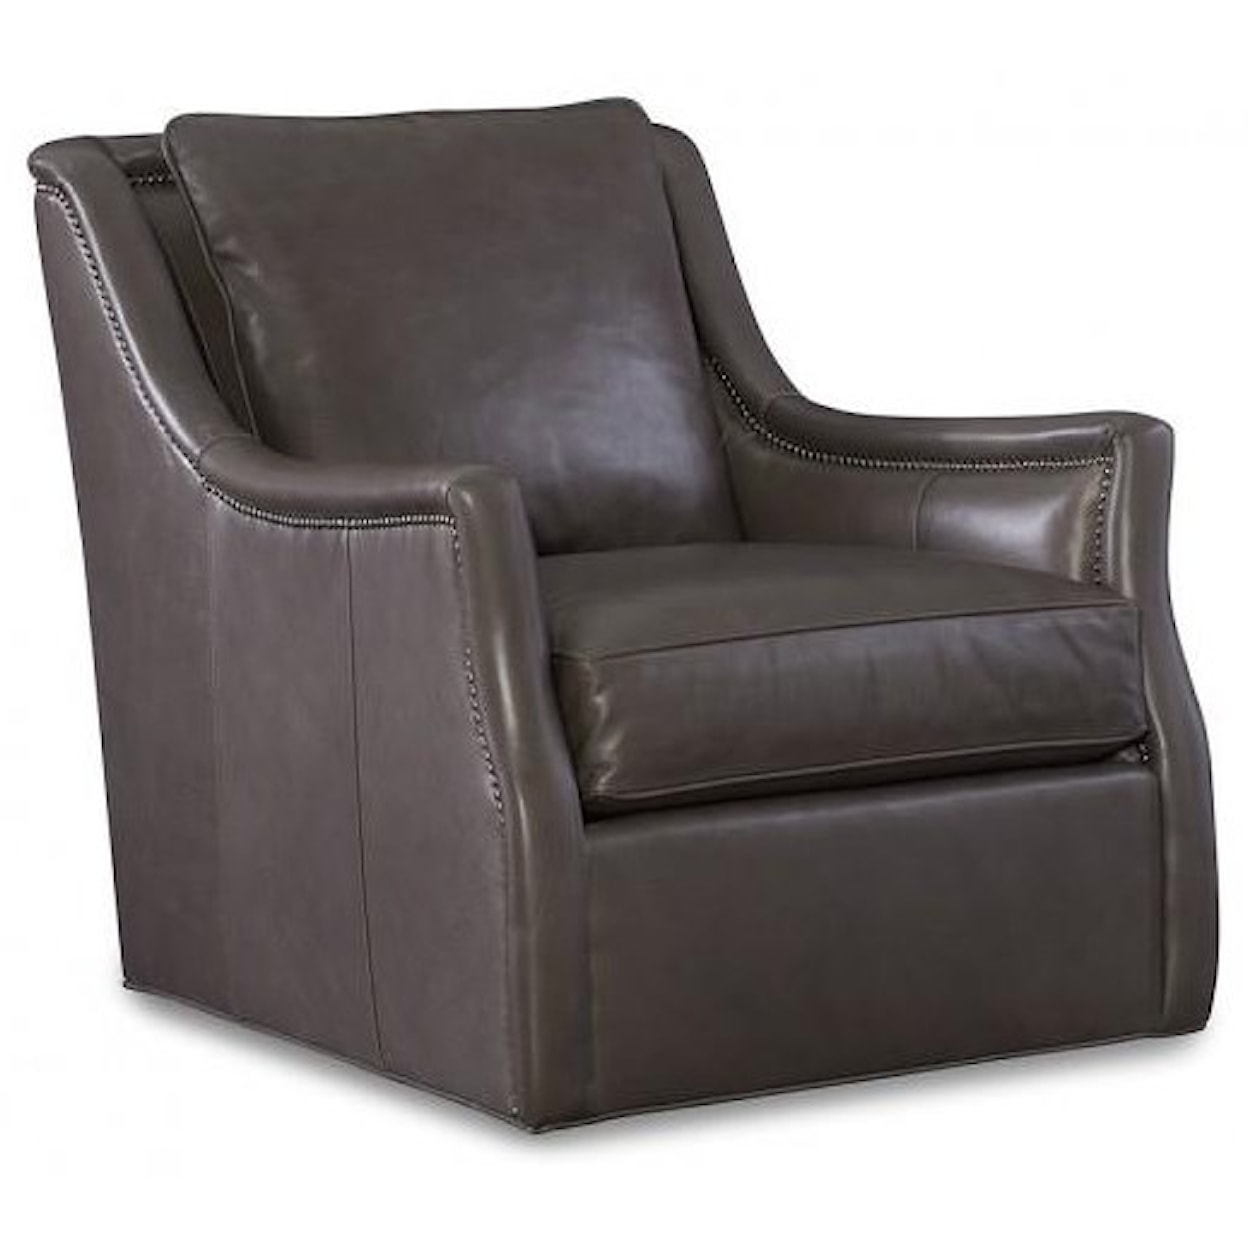 C.R. Laine Chairs and Chaises Marius Swivel Leather Chair